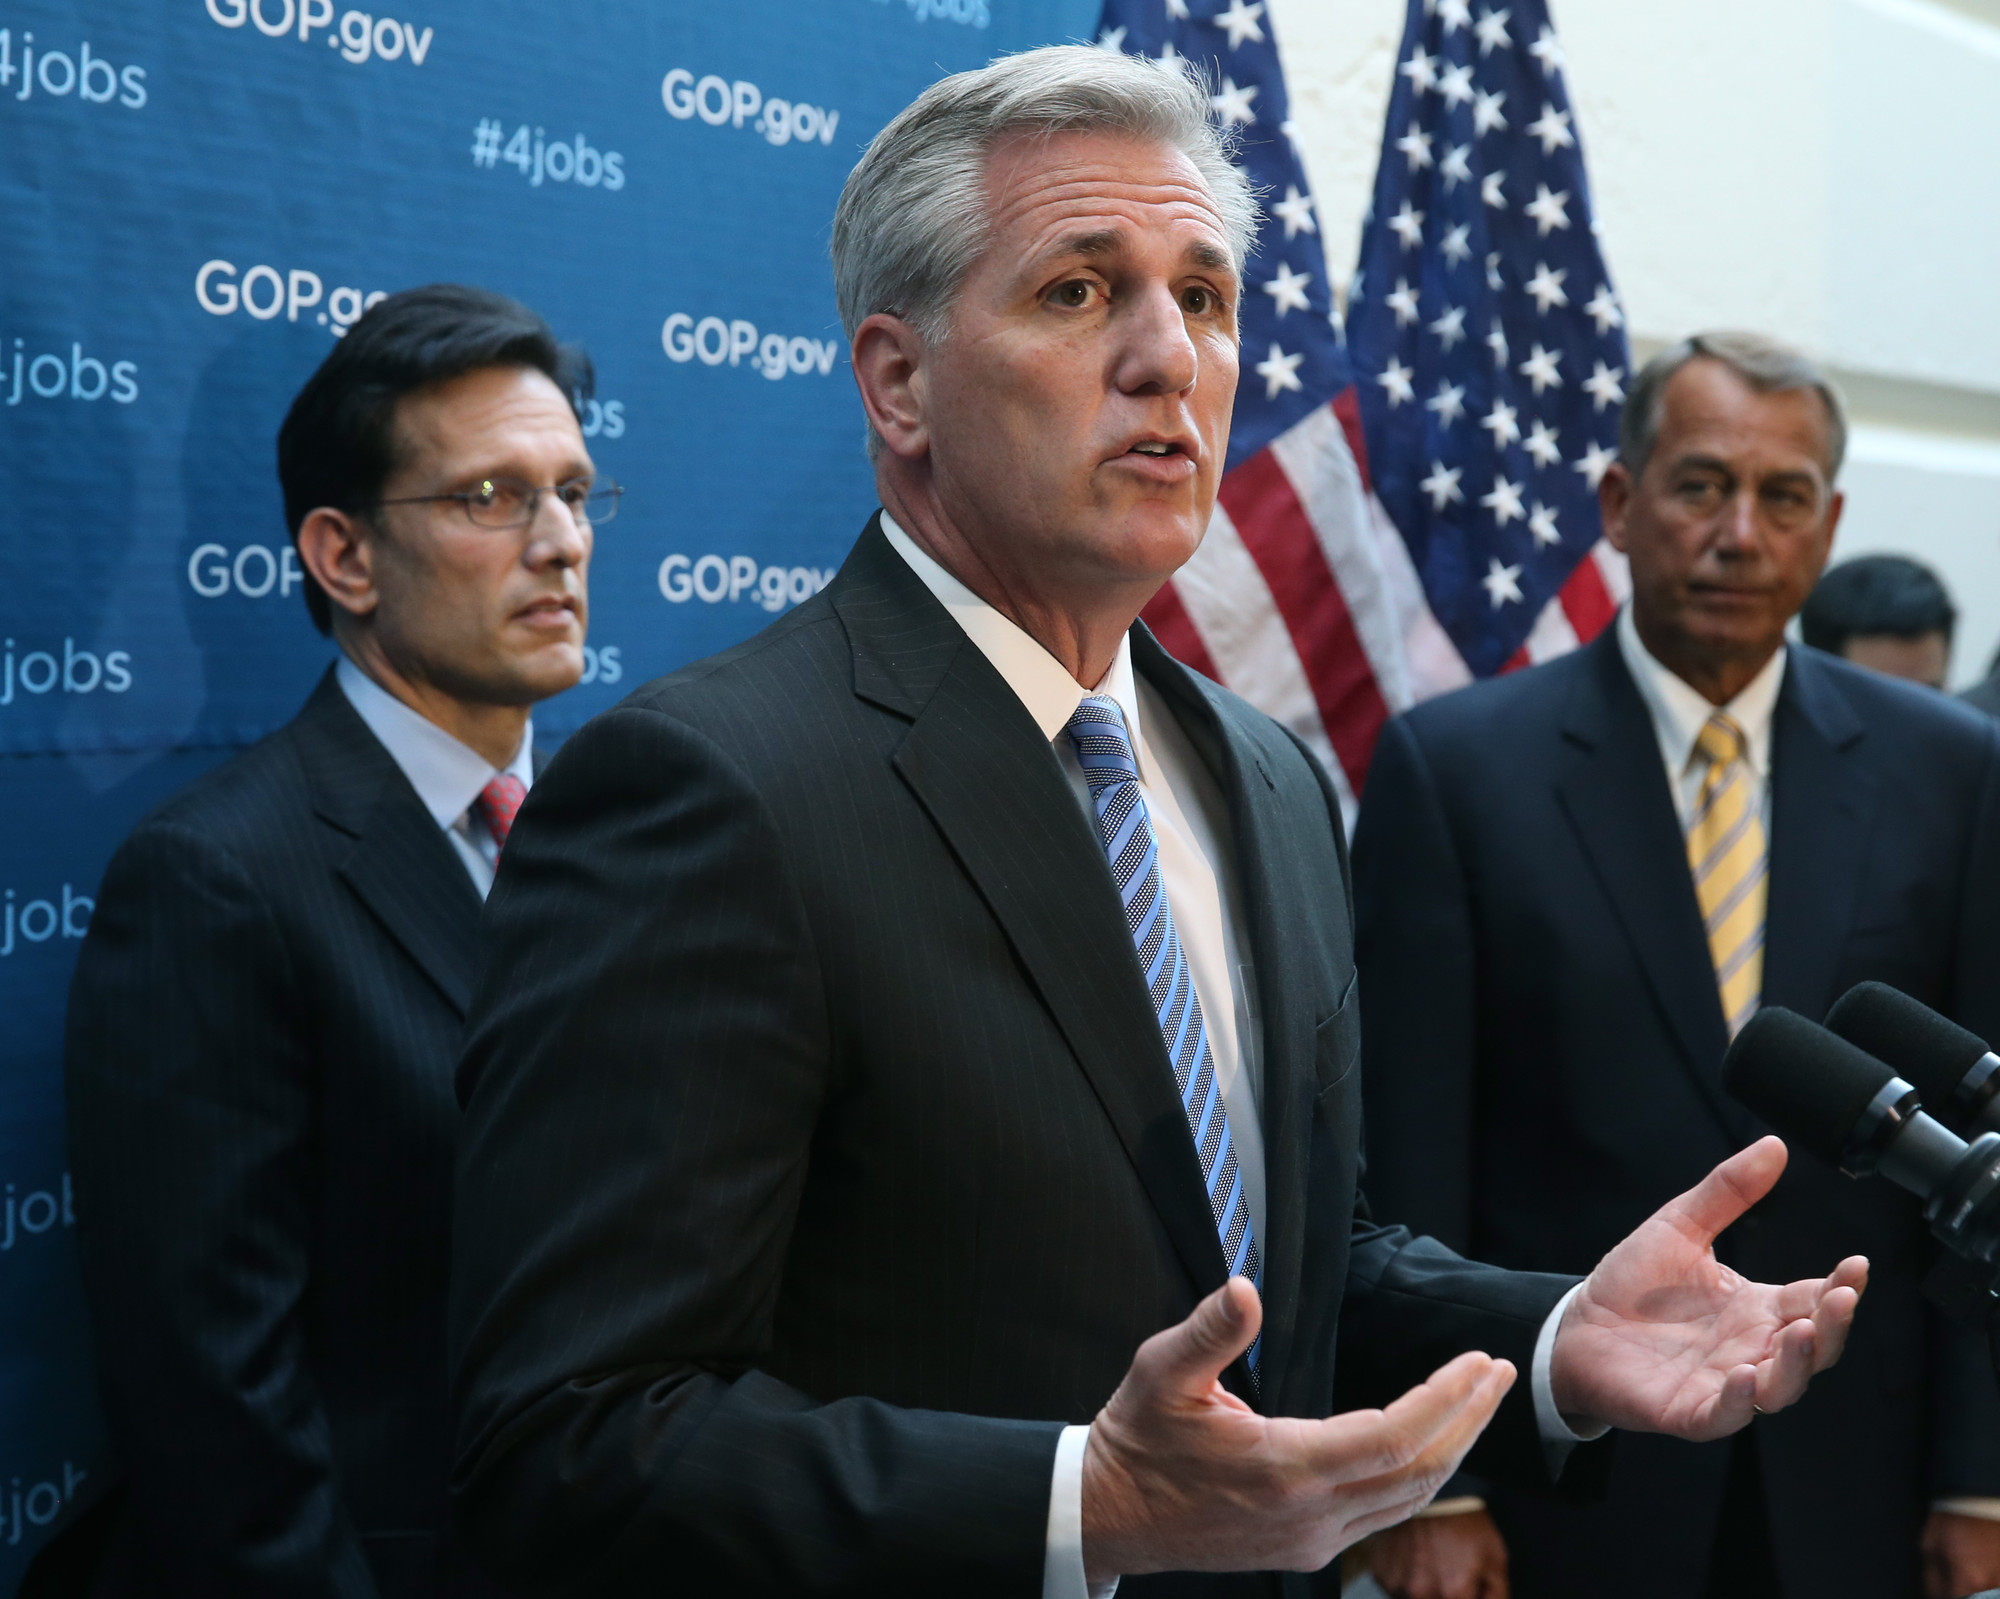 Kevin McCarthy speaks to the media while flanked by Eric Cantor and John Boehner at the U.S. Capitol in January. (Mark Wilson/Getty Images)